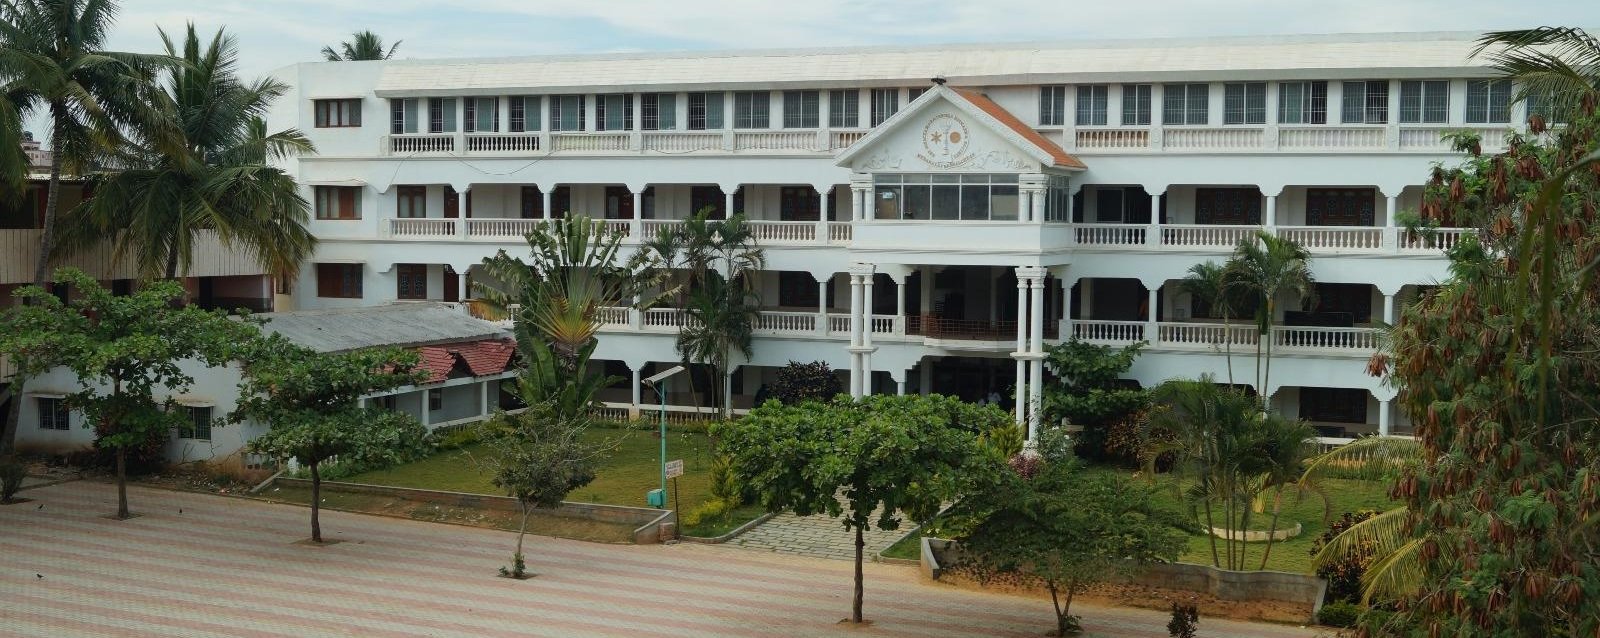 SJES College of Education